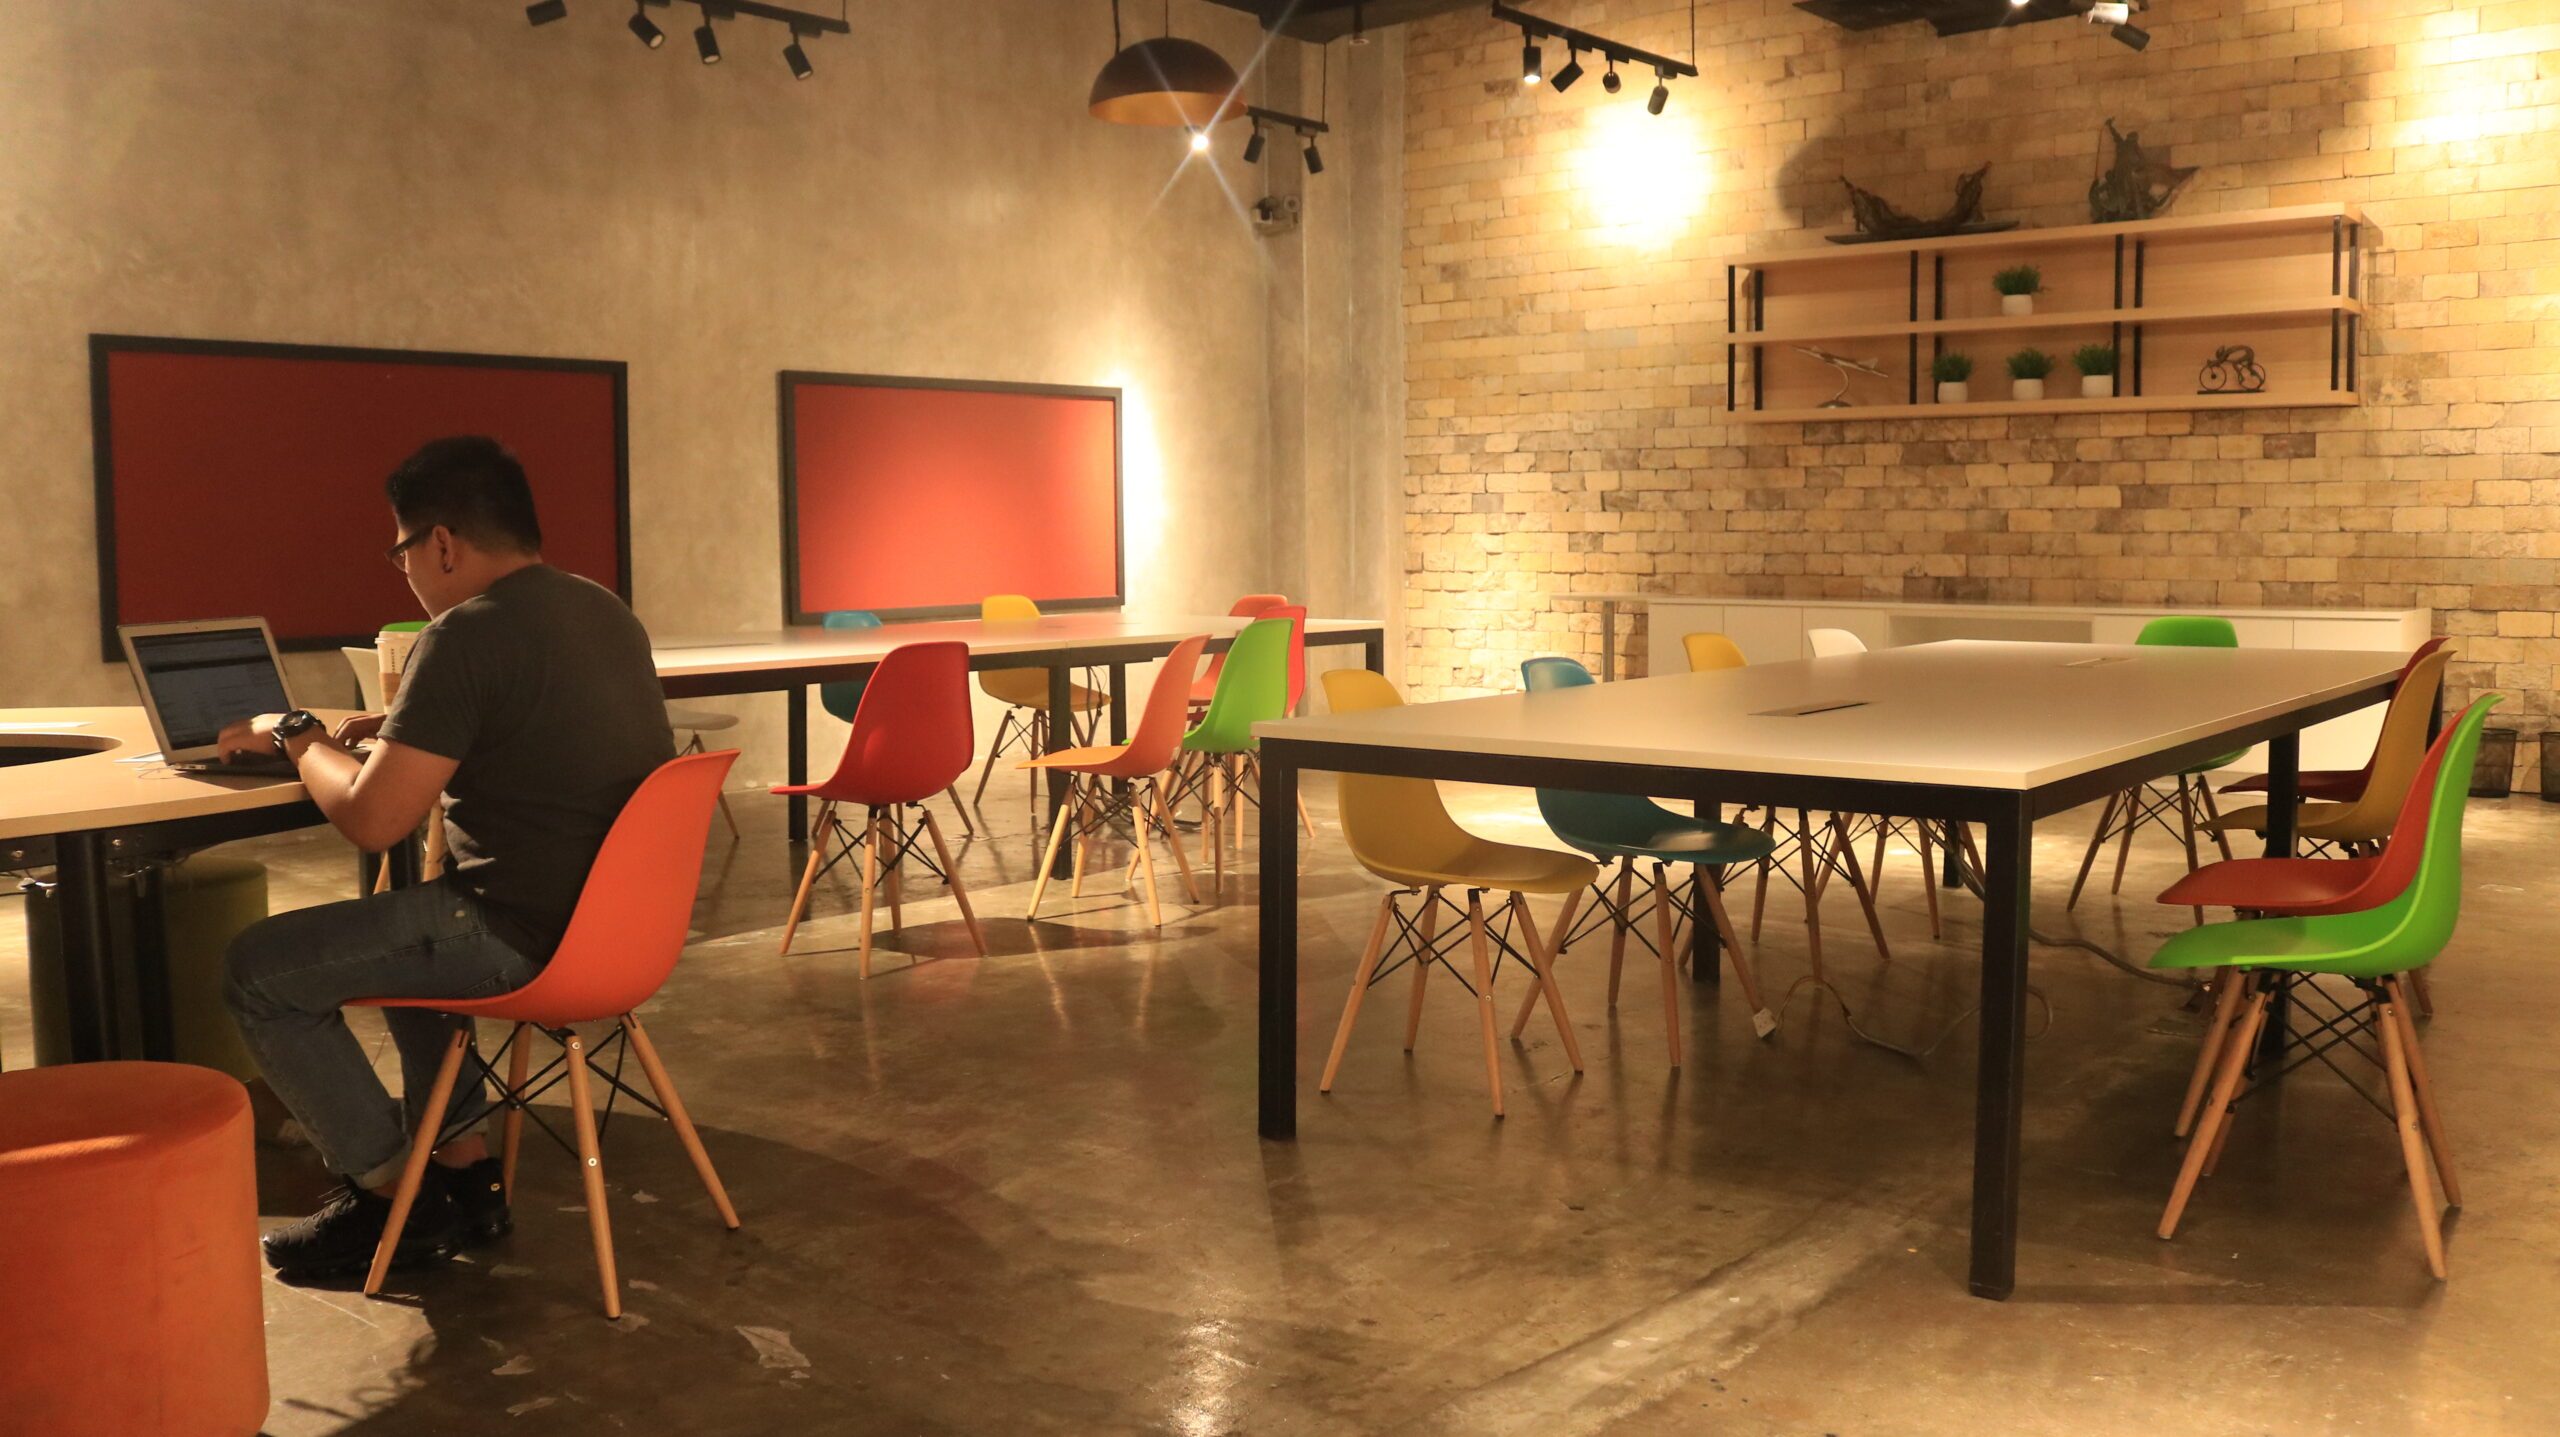 Building a case for working in a coworking space